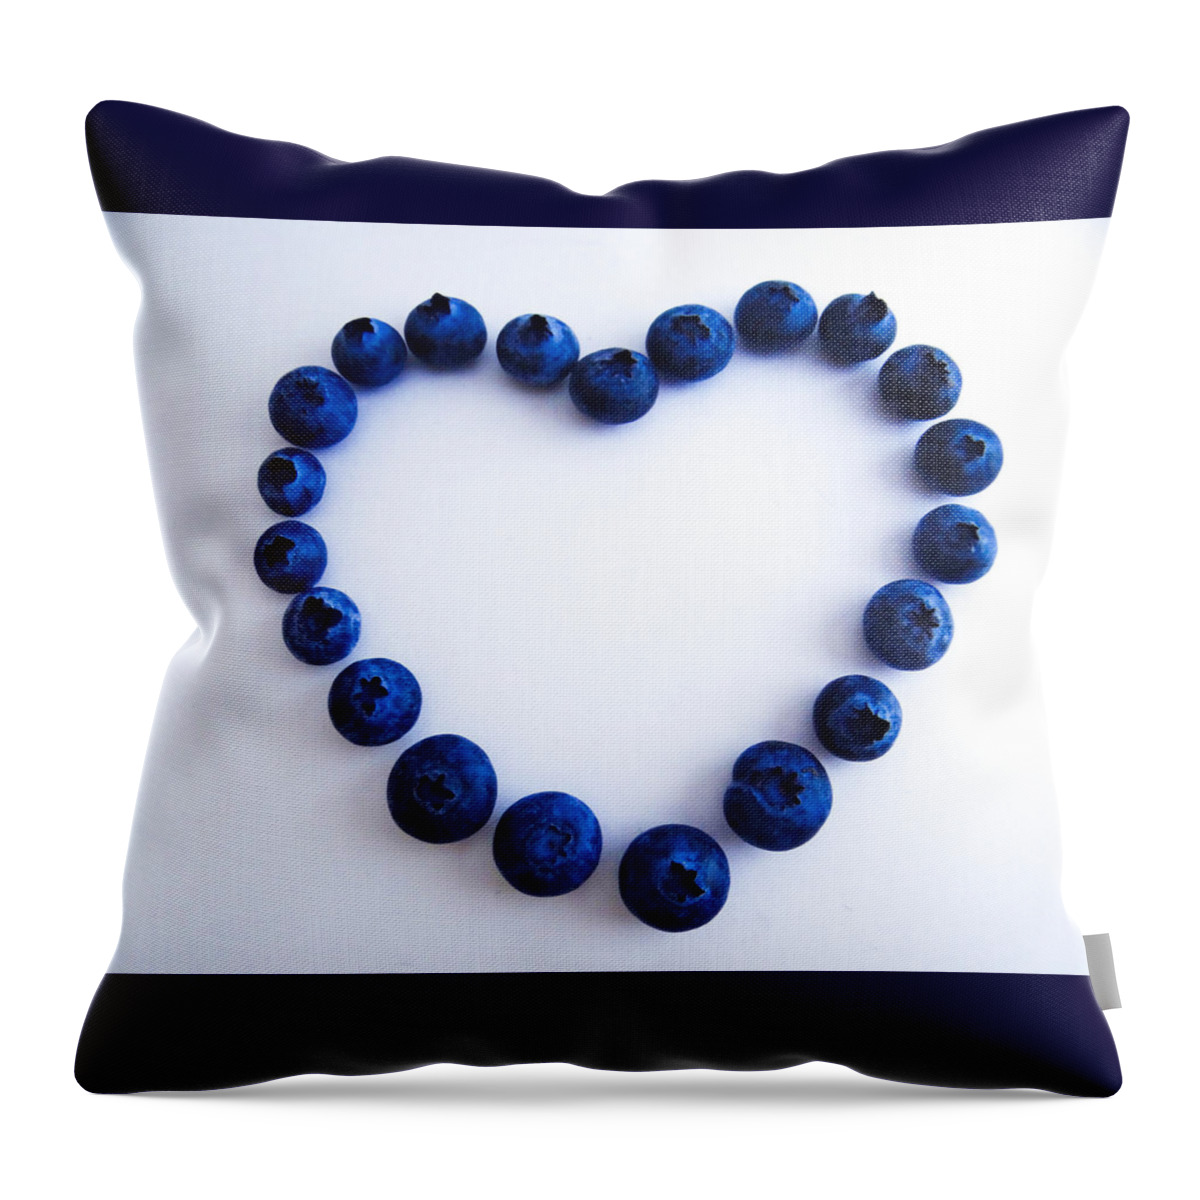 Blueberry Throw Pillow featuring the photograph Blueberry Heart by Julia Wilcox